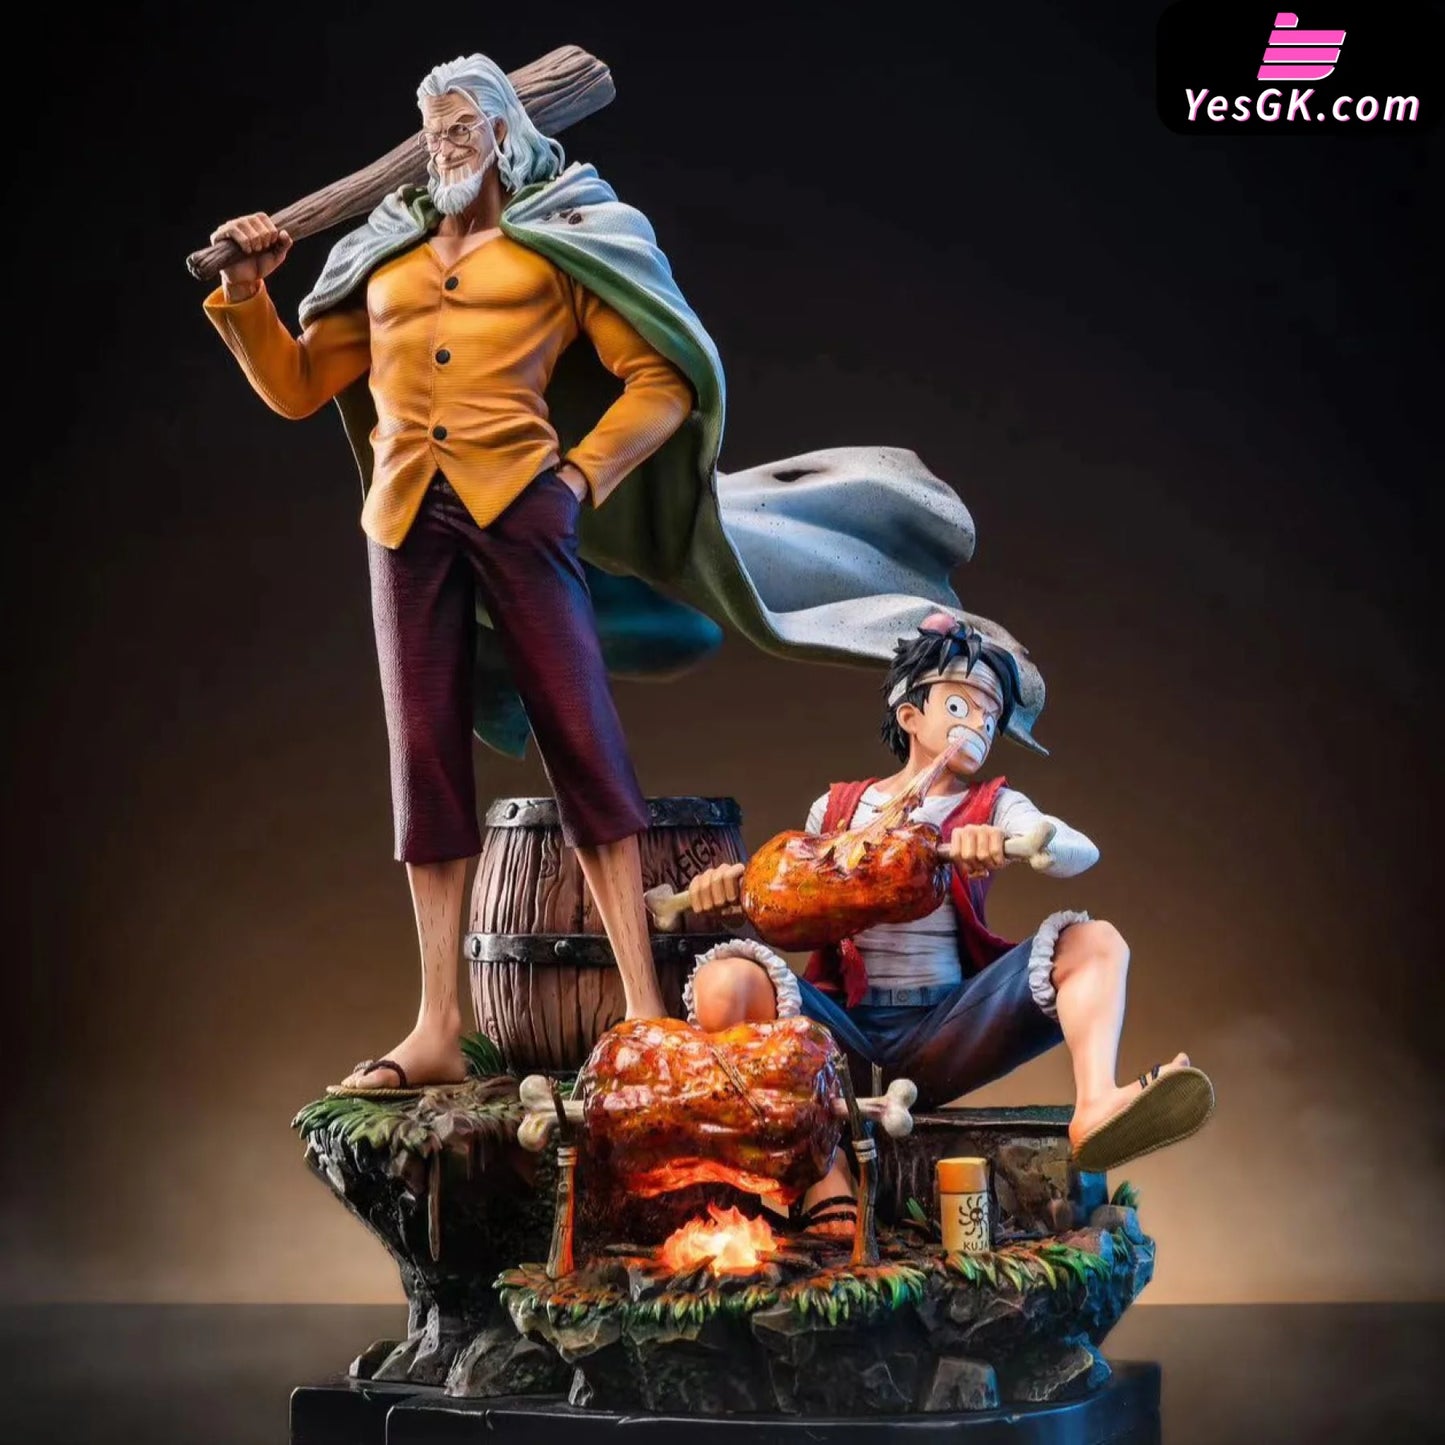 One Piece Monkey D. Luffy & Silvers Rayleigh (Licensed) Resin Statue - Jimei Palace Studio